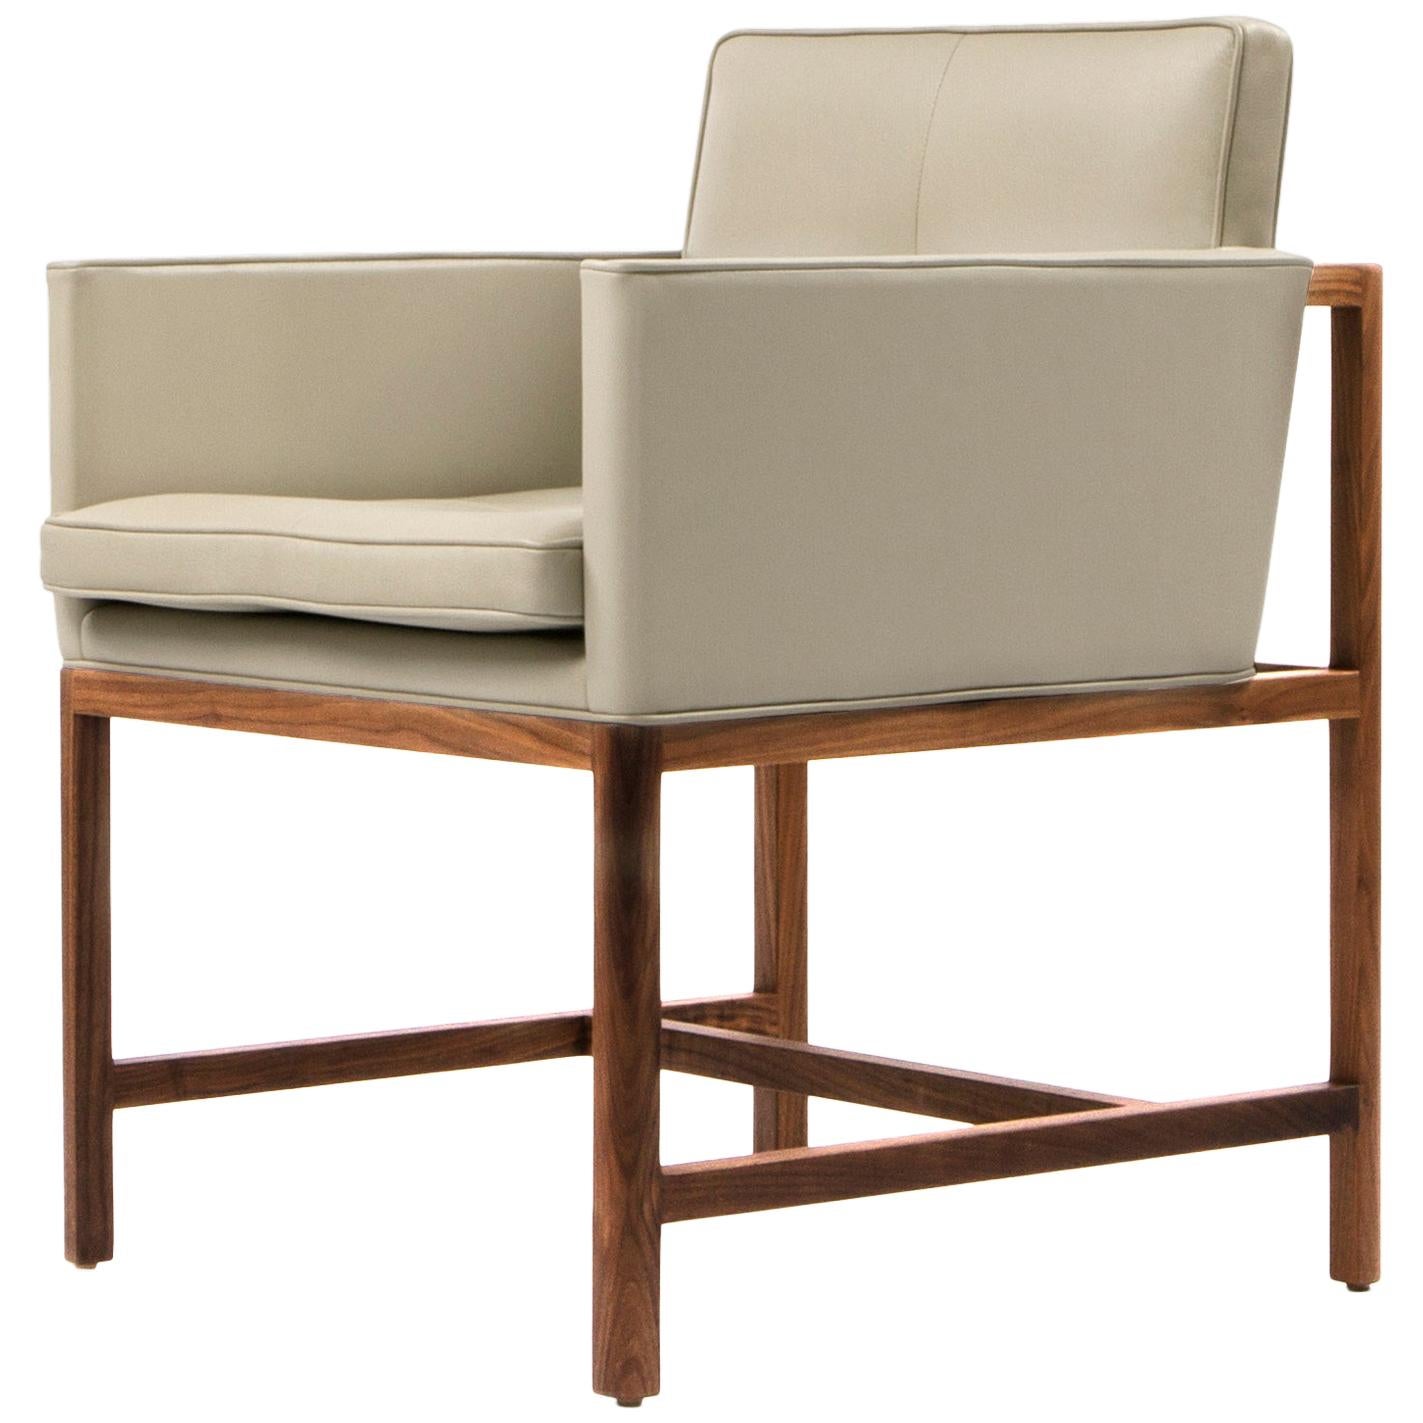 Wood Frame Armchair in Solid Walnut and Leather Designed by Craig Bassam